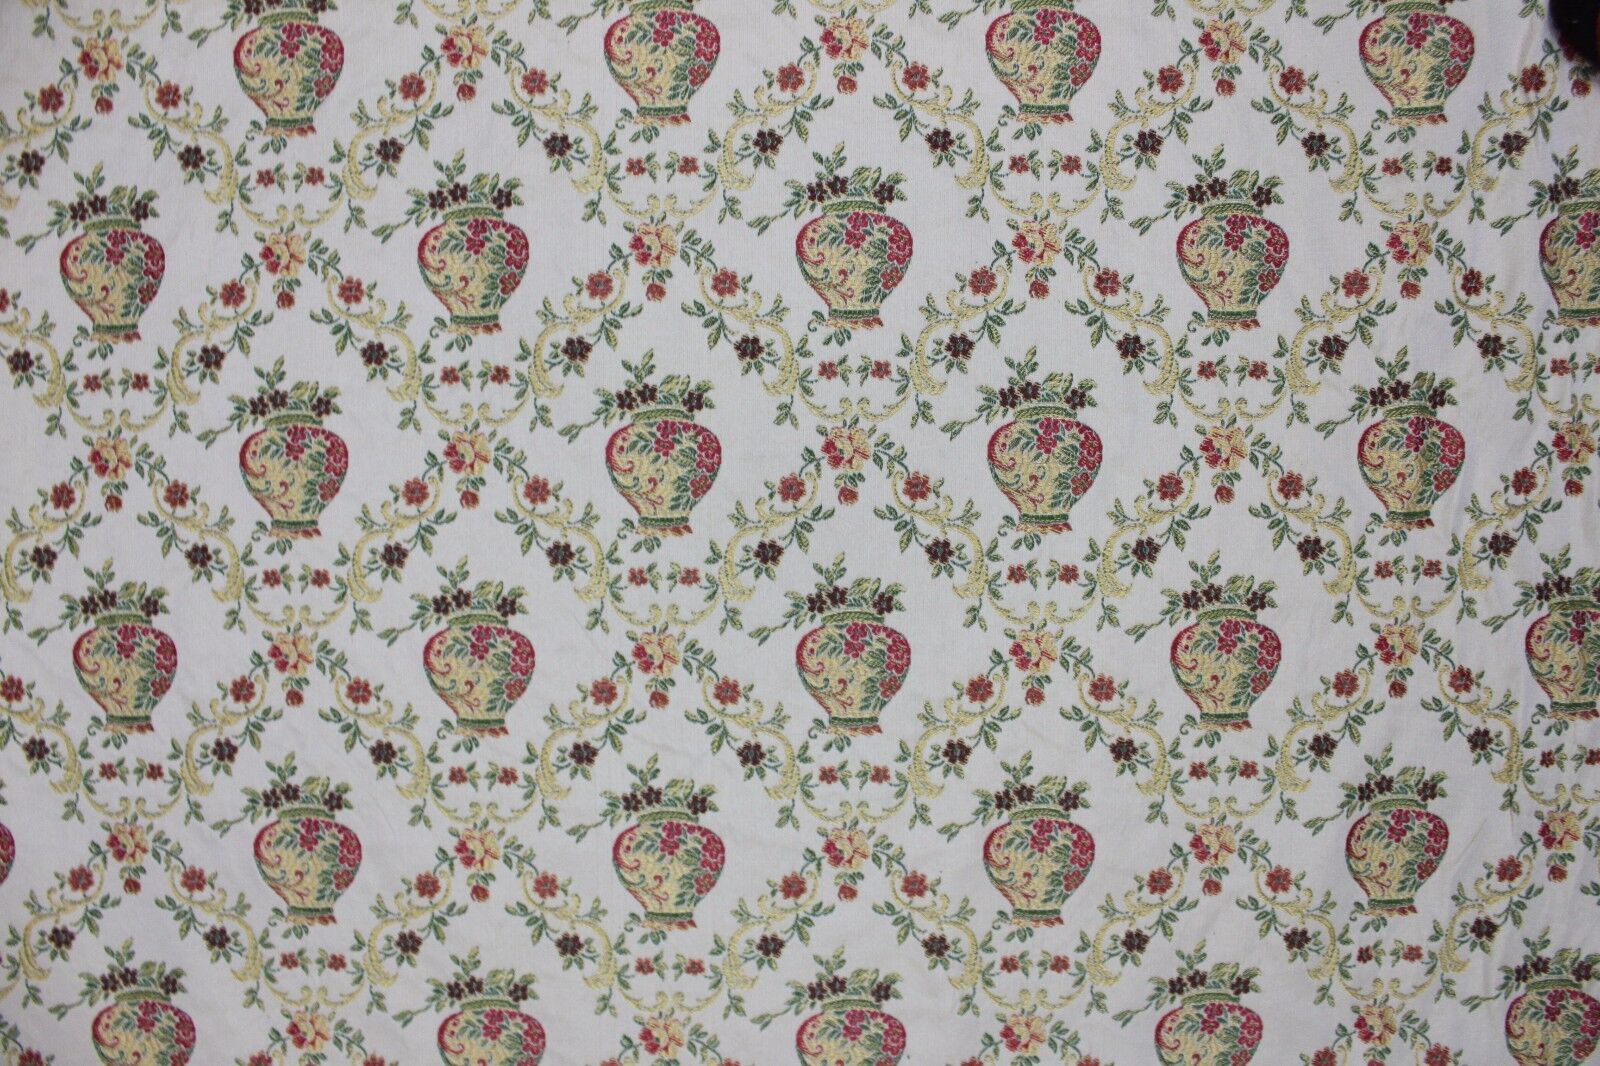 6 1/3 YARDS FLORAL DAMASK Flowers in Vase Upholstery Fabric Victorian Sofa Chair